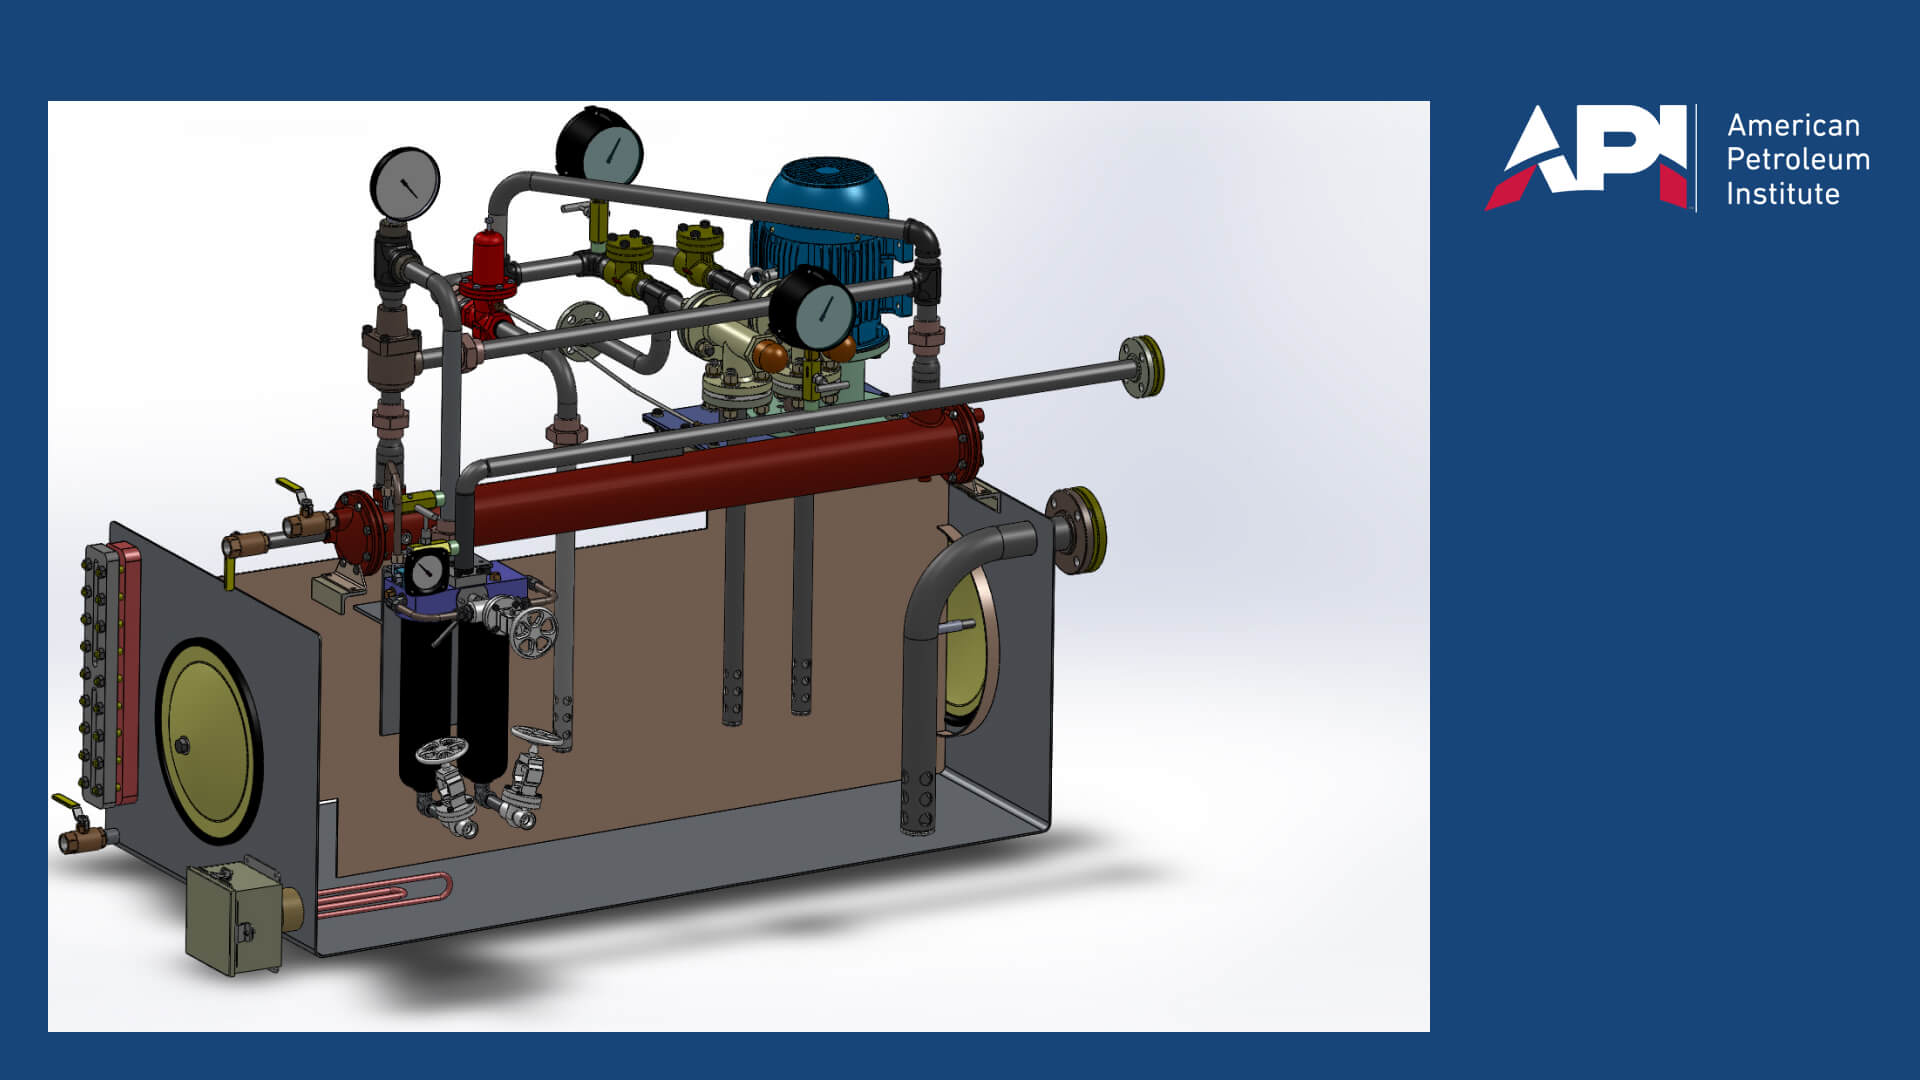 A 3D CAD rendering of an API-approved pump